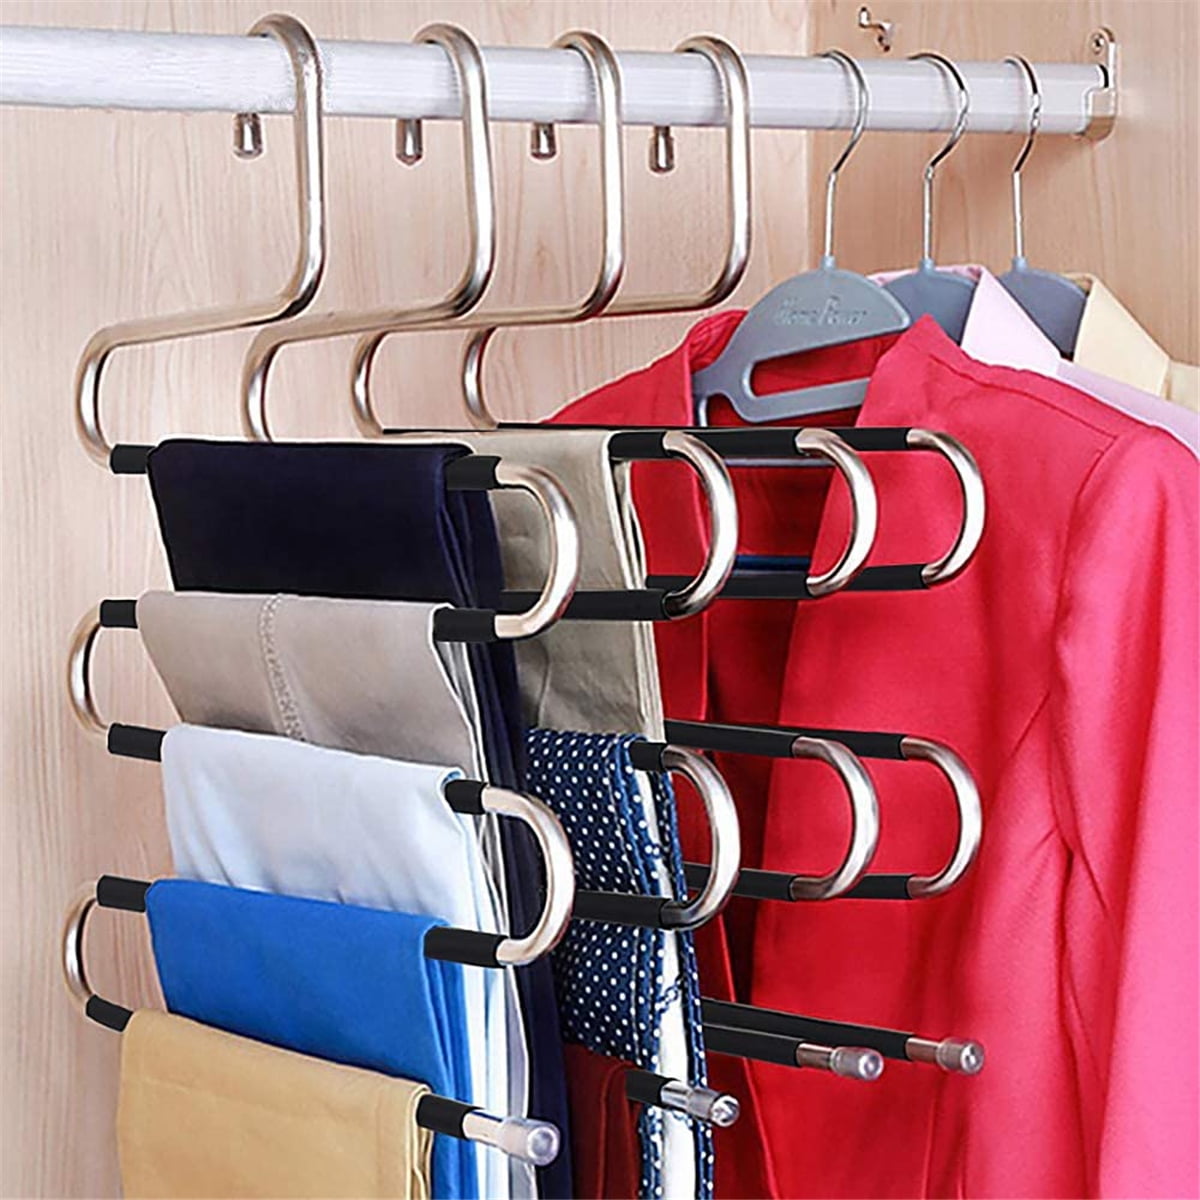 10Pcs Plastic Clips Hangers For Skirt Towel Napkin Clothes Dry Fabric 